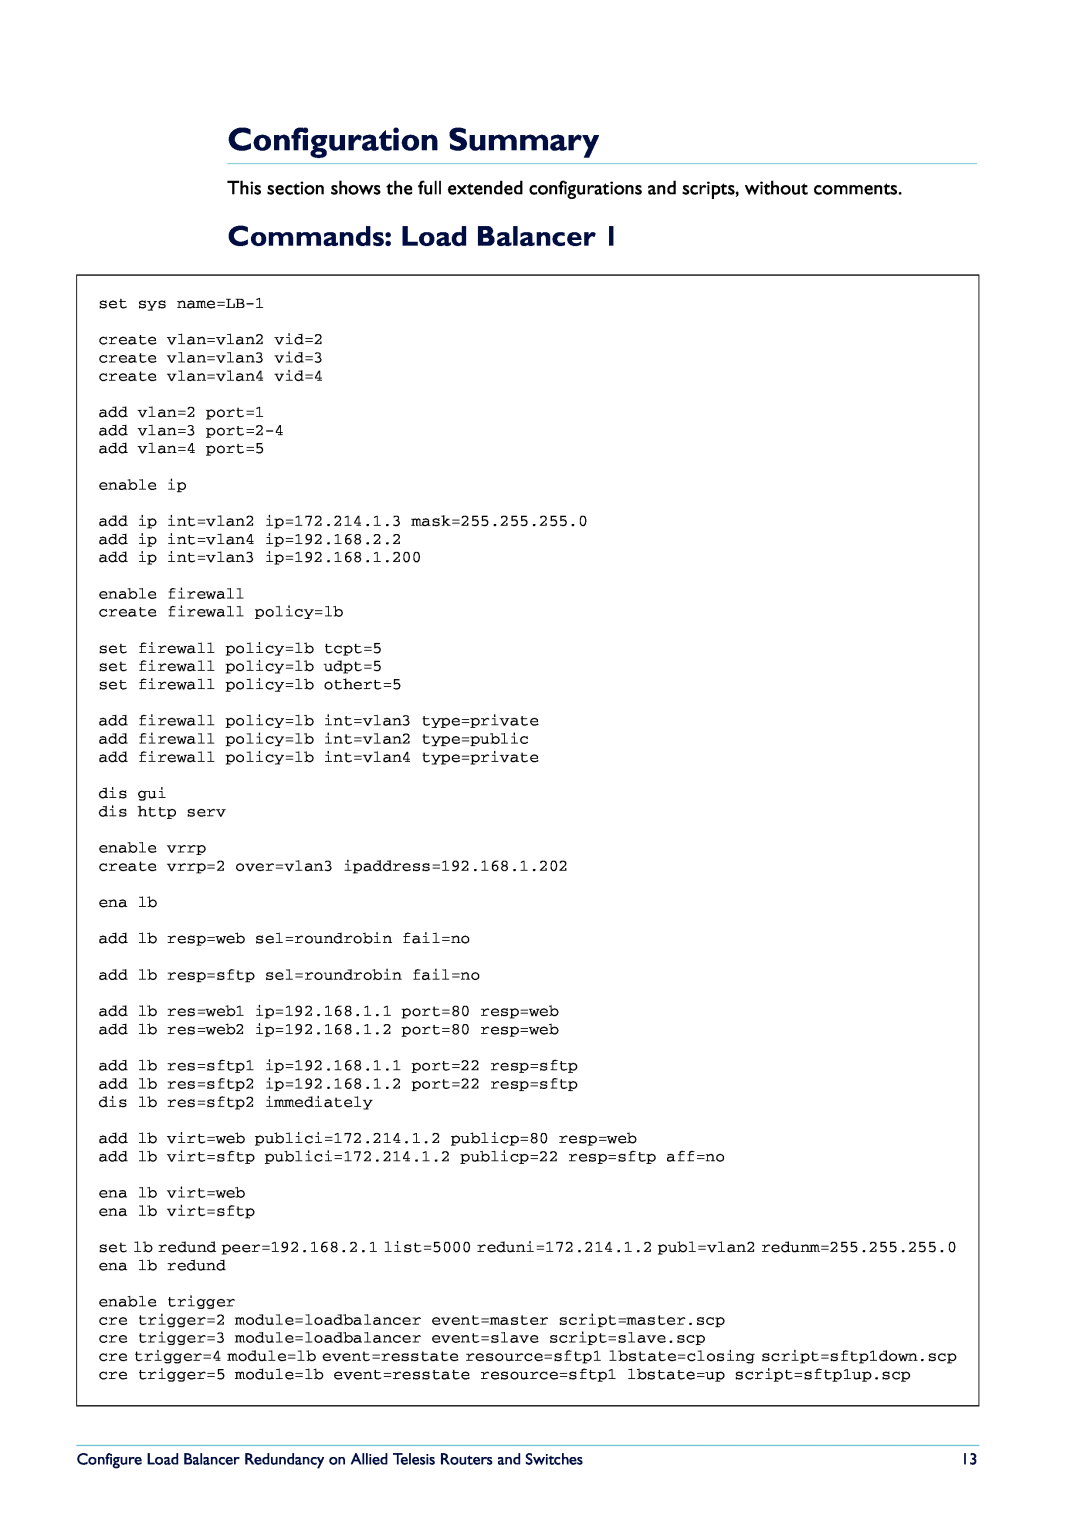 Allied Telesis Routers and Switches manual Configuration Summary, Commands Load Balancer 